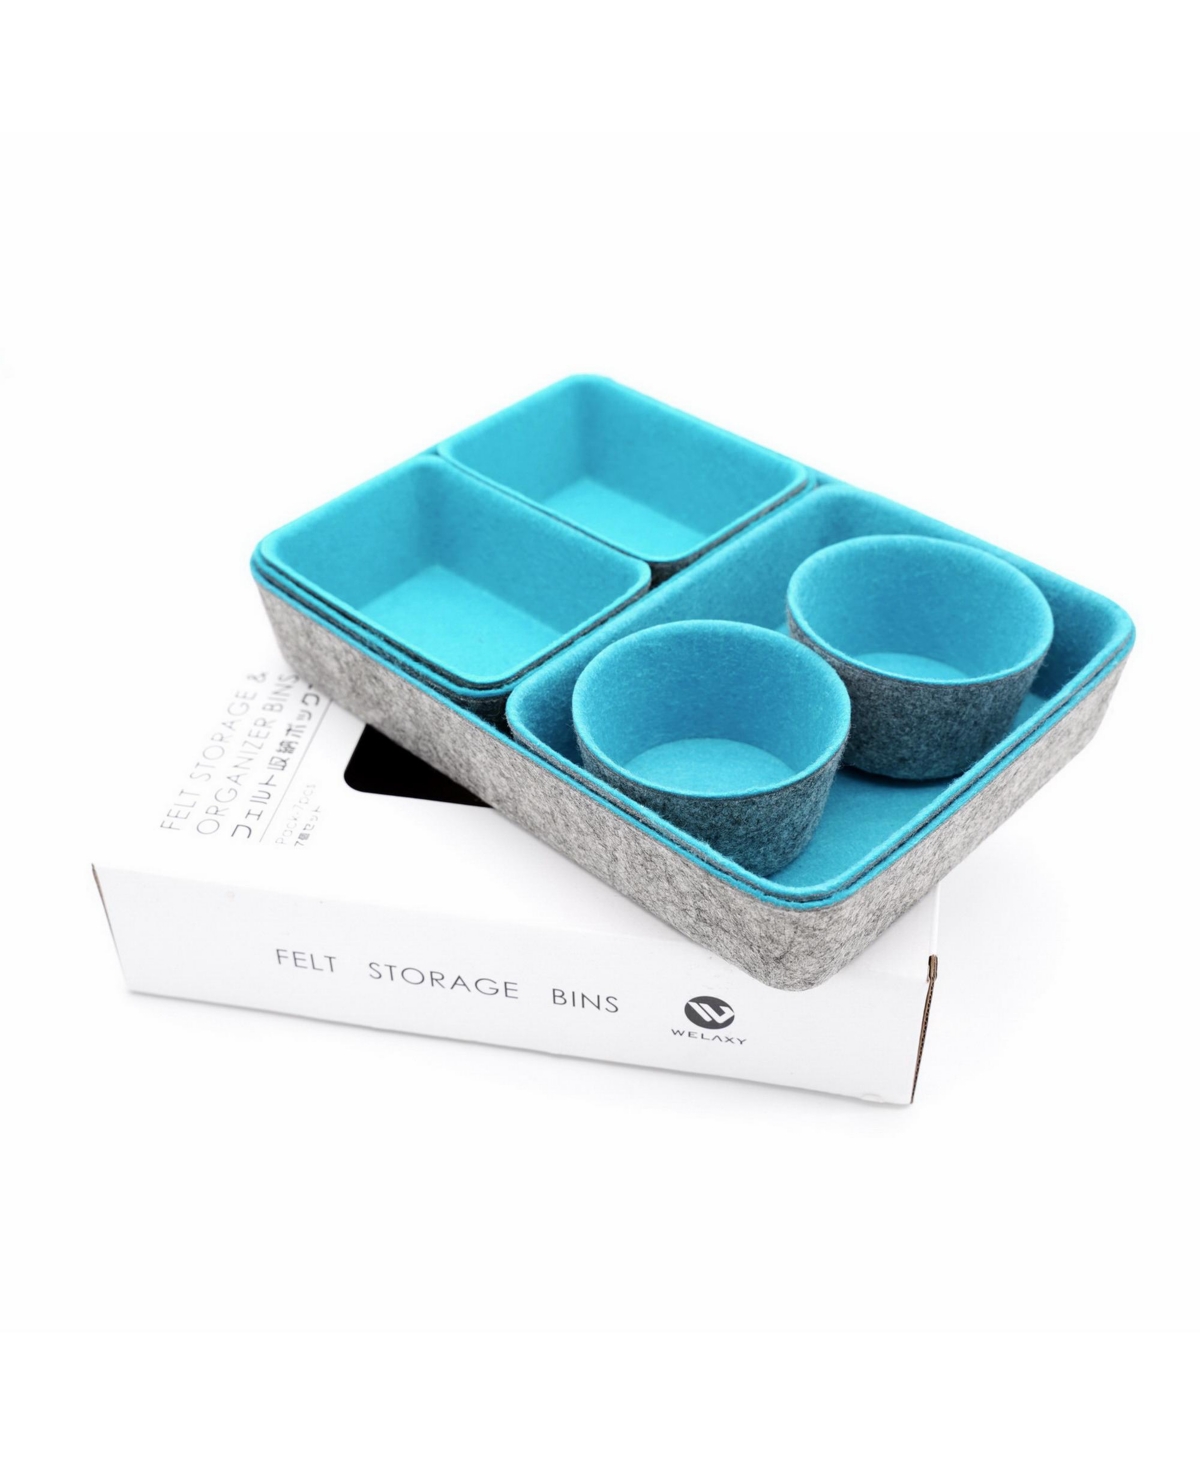 7 Piece Felt Drawer Organizer Set with Round Cups and Trays - Turquoise